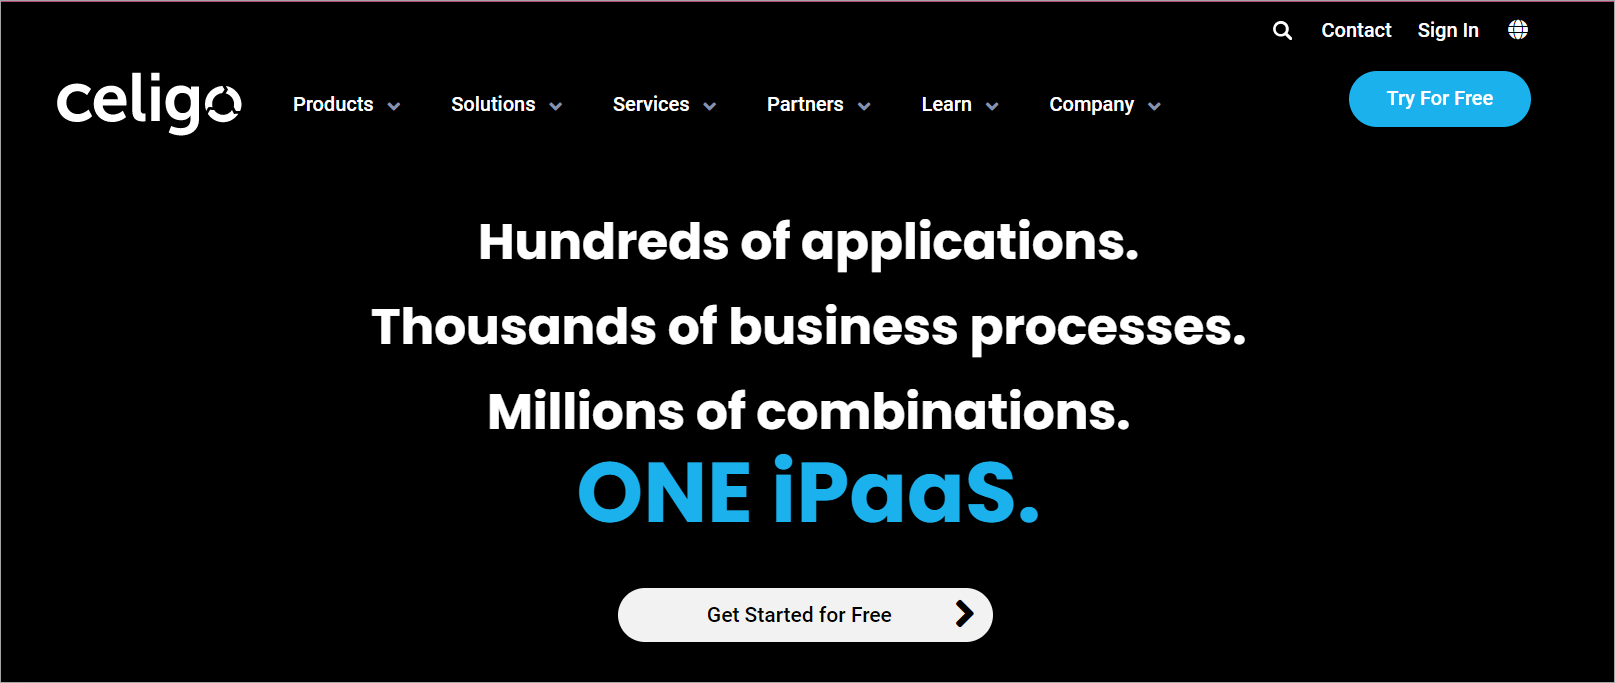 Celigo is a startup that specializes in integrating your favorite SaaS apps. Celigo is a business that aims to "allow separate top apps to function together as one."